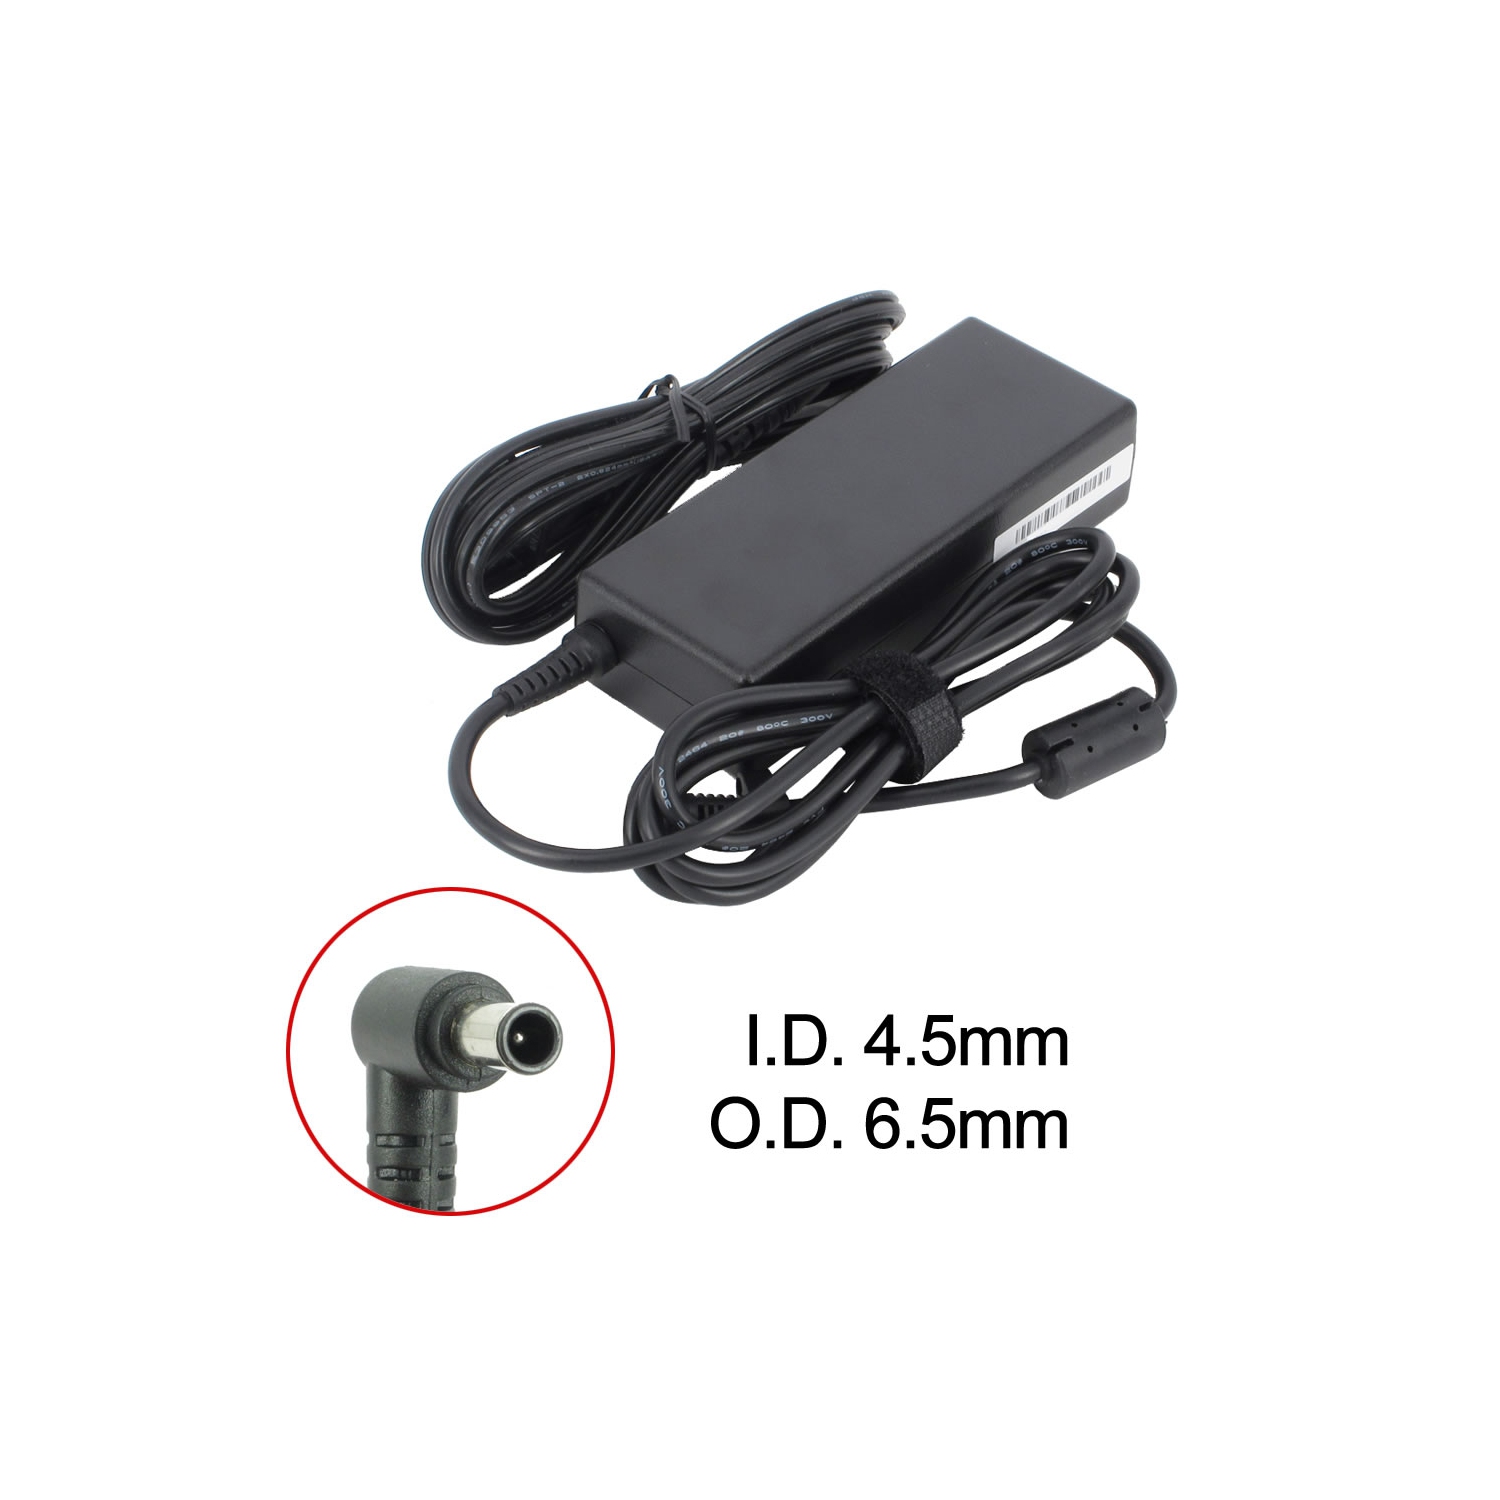 Brand New Laptop AC Adapter for LG XNOTE C400, ADP-90TH A, PCGA-AC19V19, VGP-AC19V14, VGP-AC19V26, VGP-AC19V43